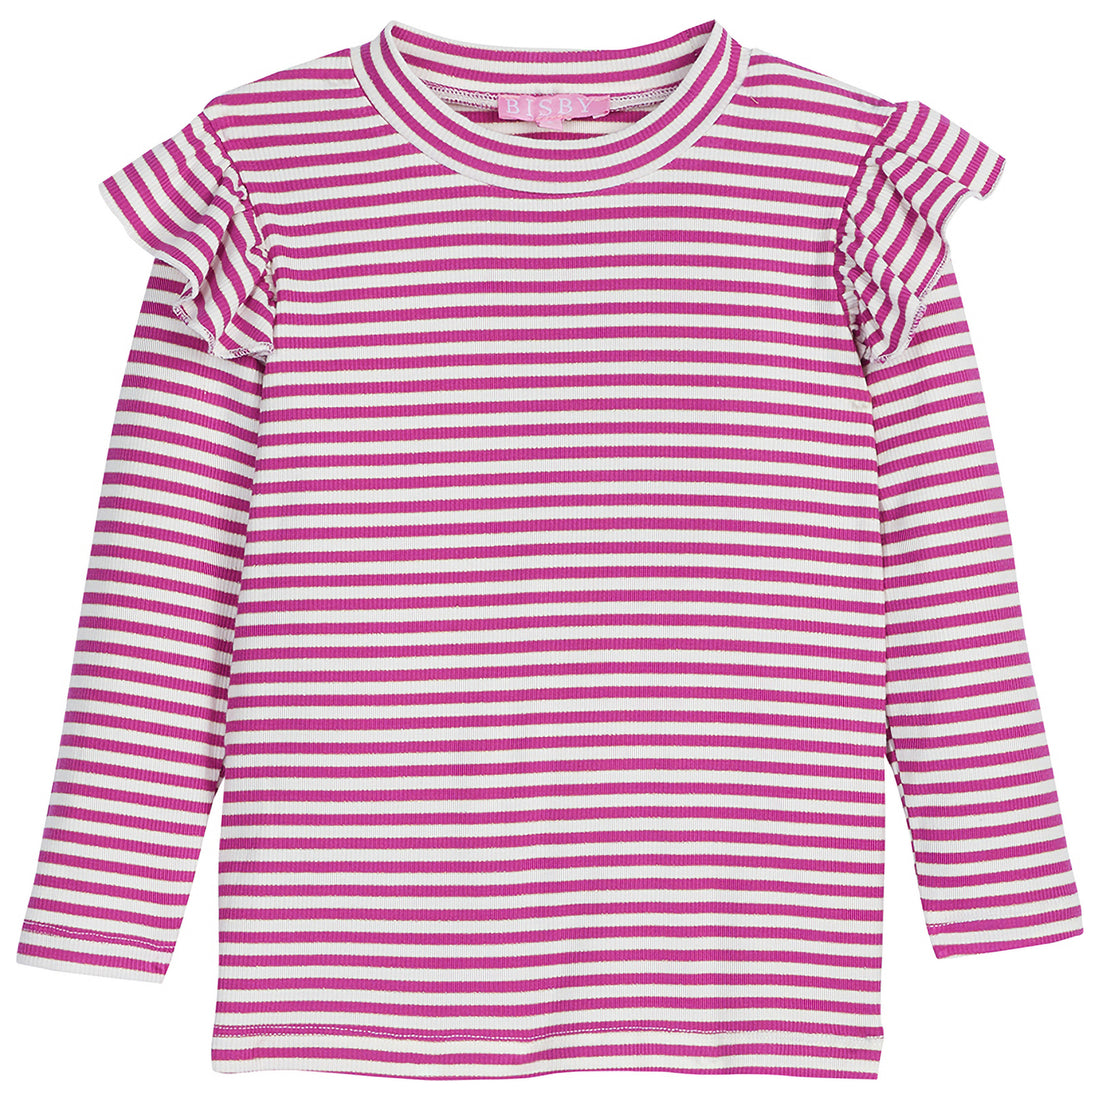 Long sleeve maroon/magenta and white sparkly stripe long sleeve top with ruffles on sleeves--SadieTop BISBY girl/teen